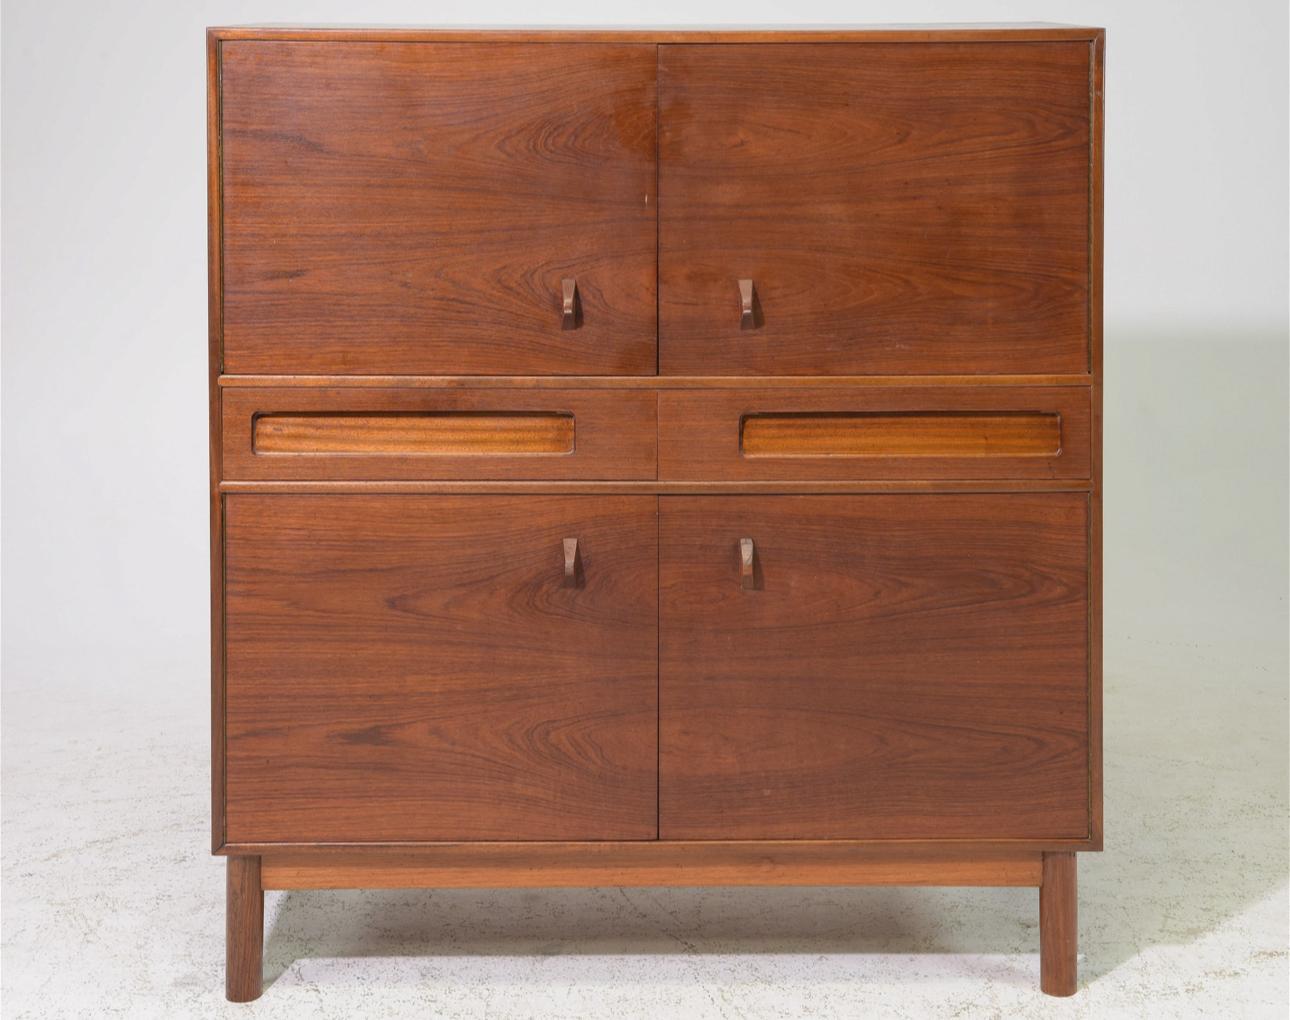 Beautiful tall sideboard designed by Tom Robertson for A.H. McIntosh in Scotland, circa 1960s. This beautiful cabinet has tons of storage space including four cupboards and two drawers. Overall in very good original condition. Structurally sound.